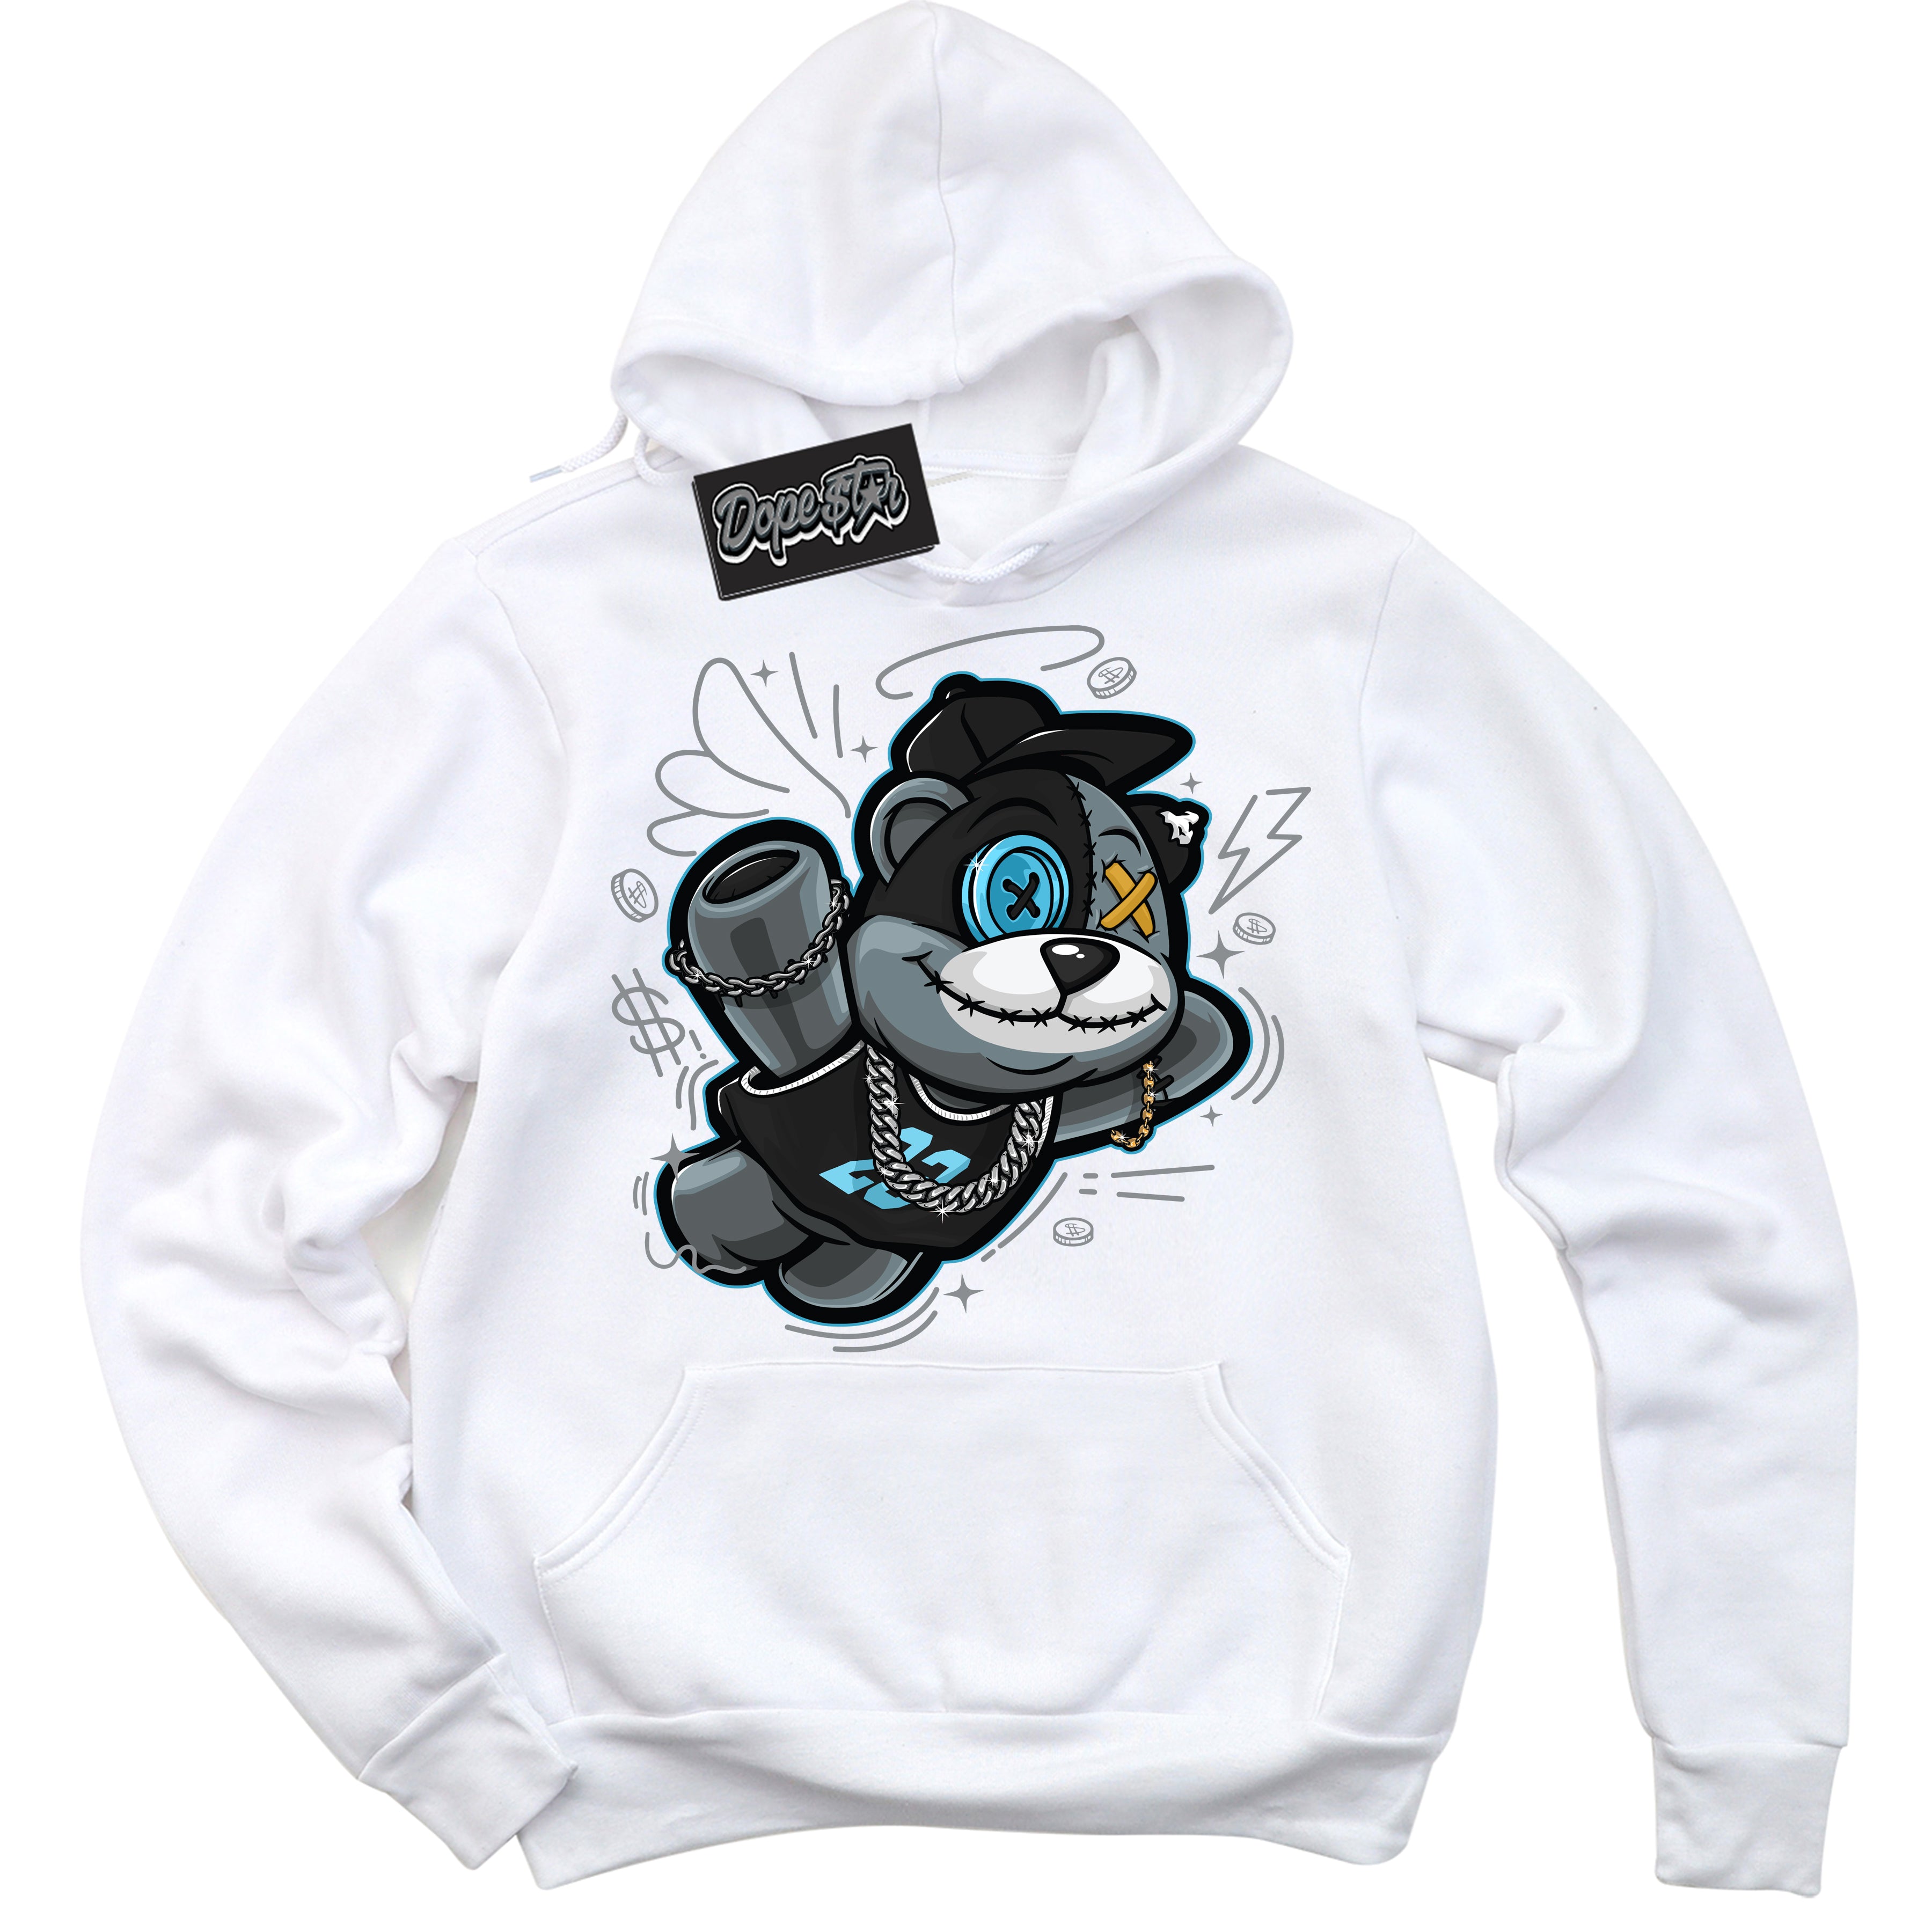 Cool White Hoodie with “ Slam Dunk Bear ”  design that Perfectly Matches Aqua 5s Sneakers.